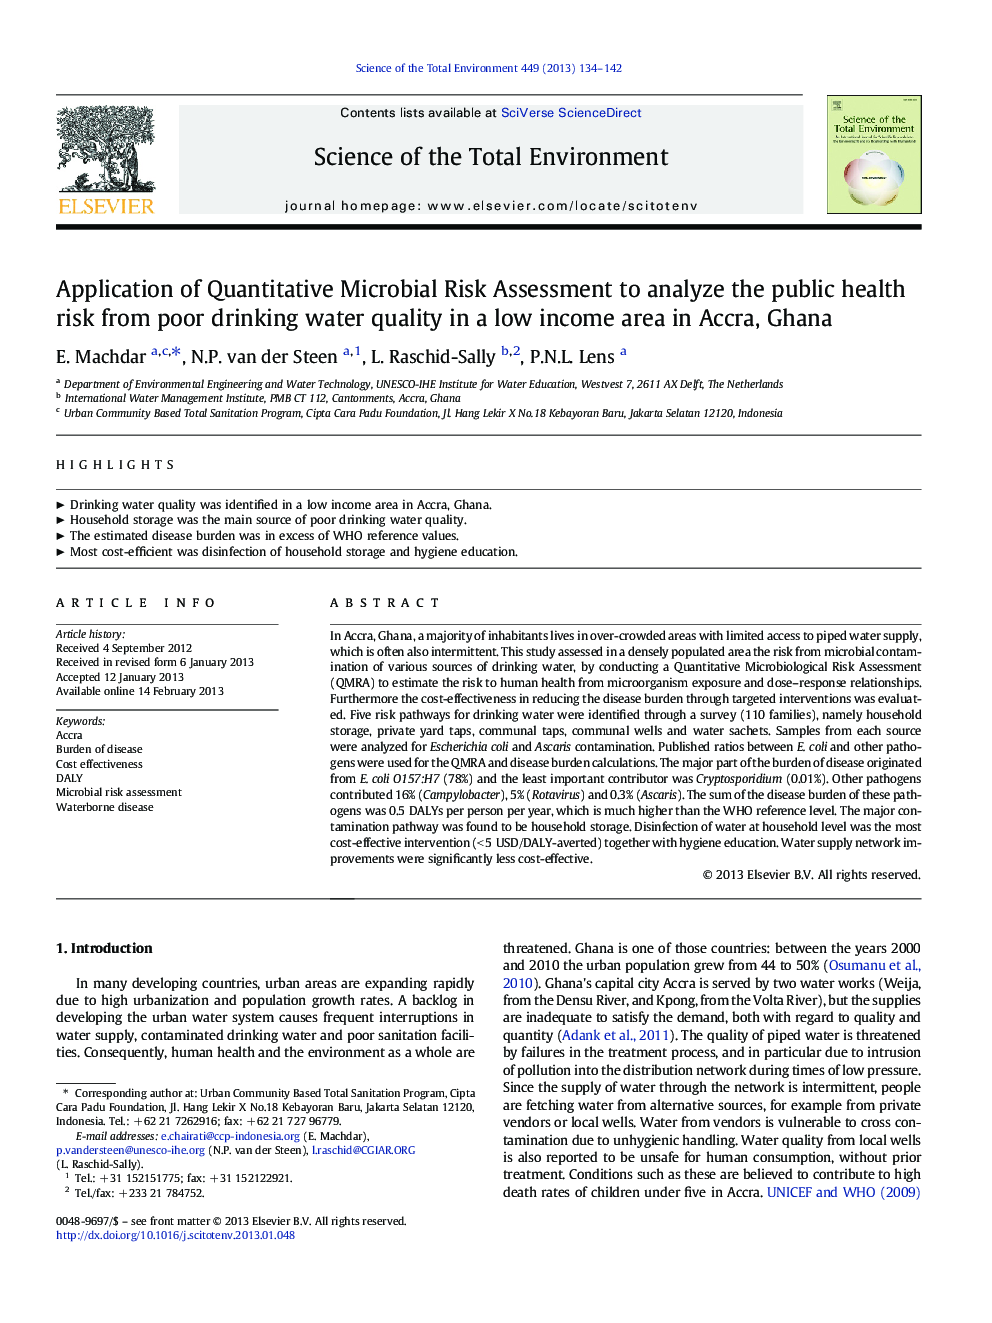 Application of Quantitative Microbial Risk Assessment to analyze the public health risk from poor drinking water quality in a low income area in Accra, Ghana